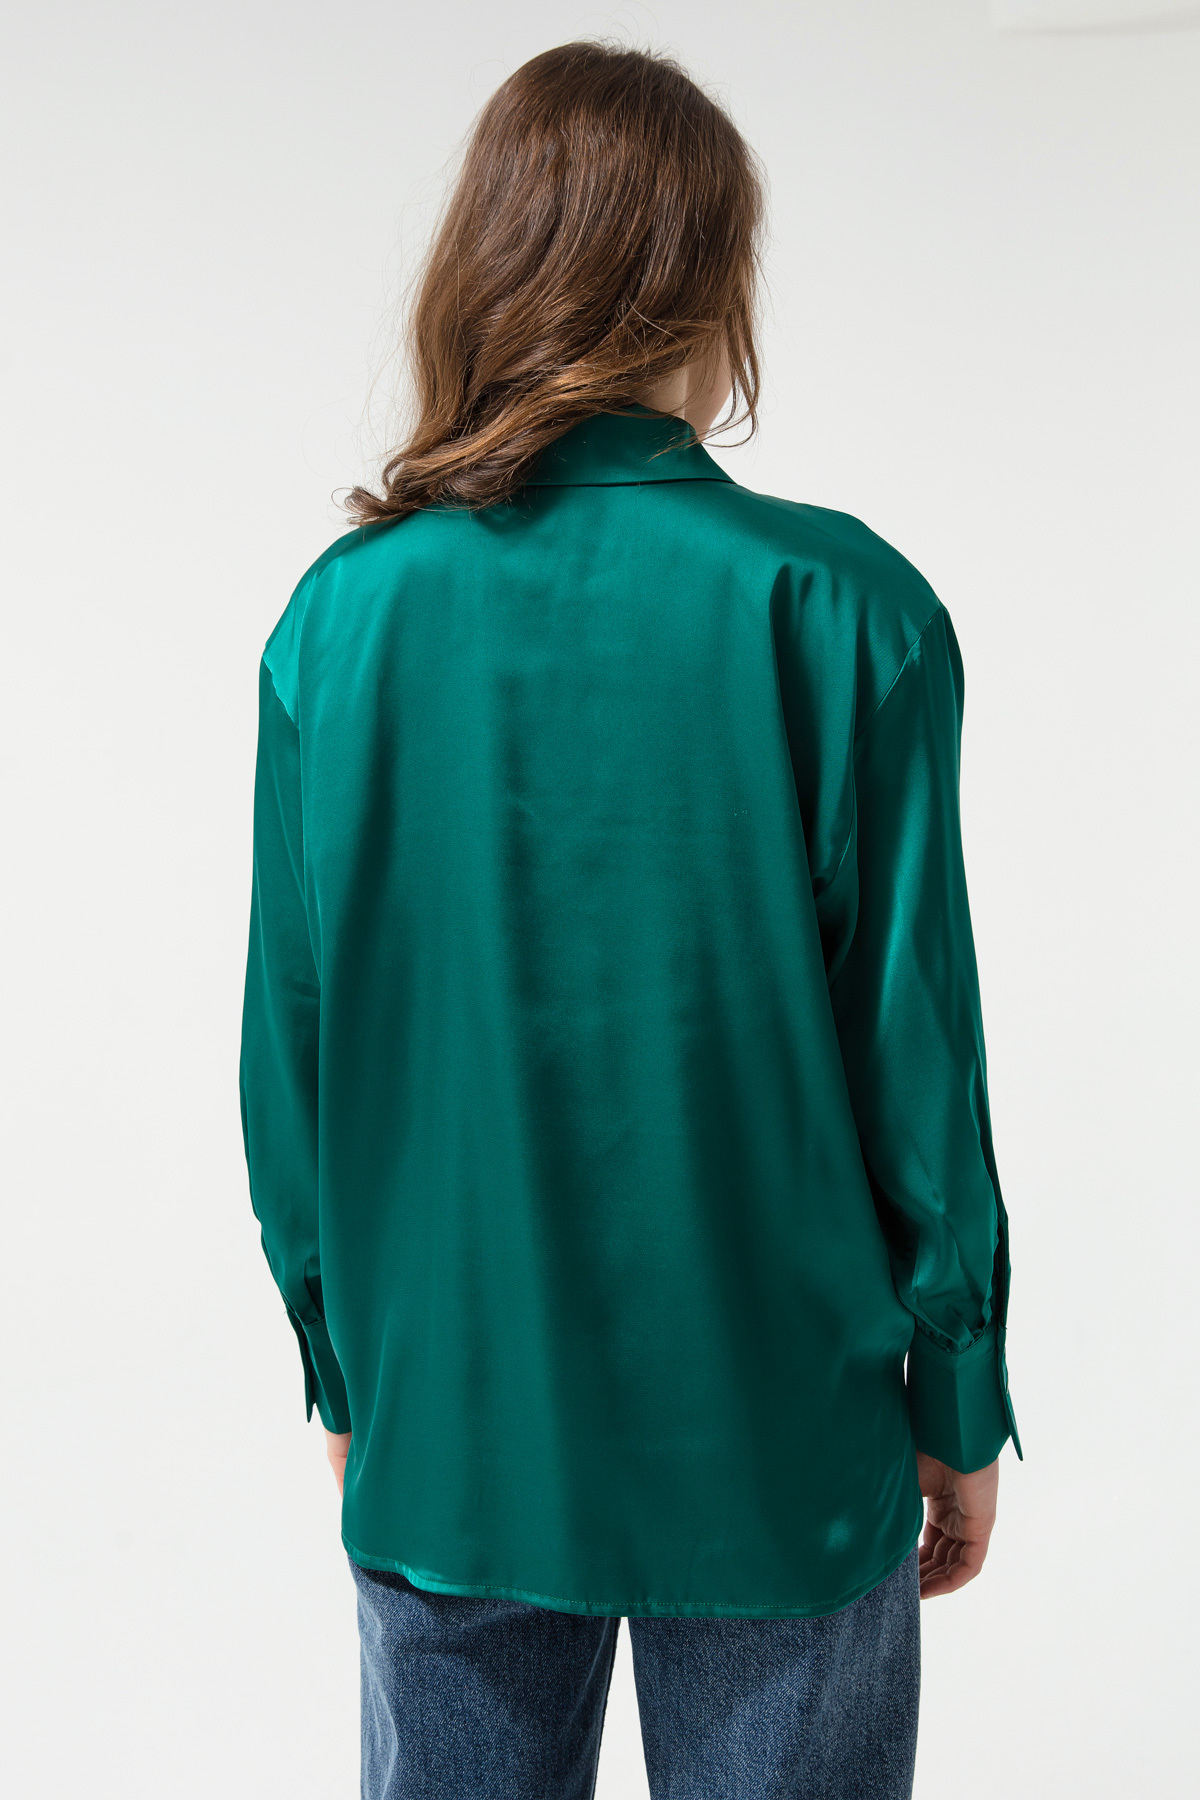 Silky Green Blouse - Image Chest - Free Image Hosting And Sharing Made Easy